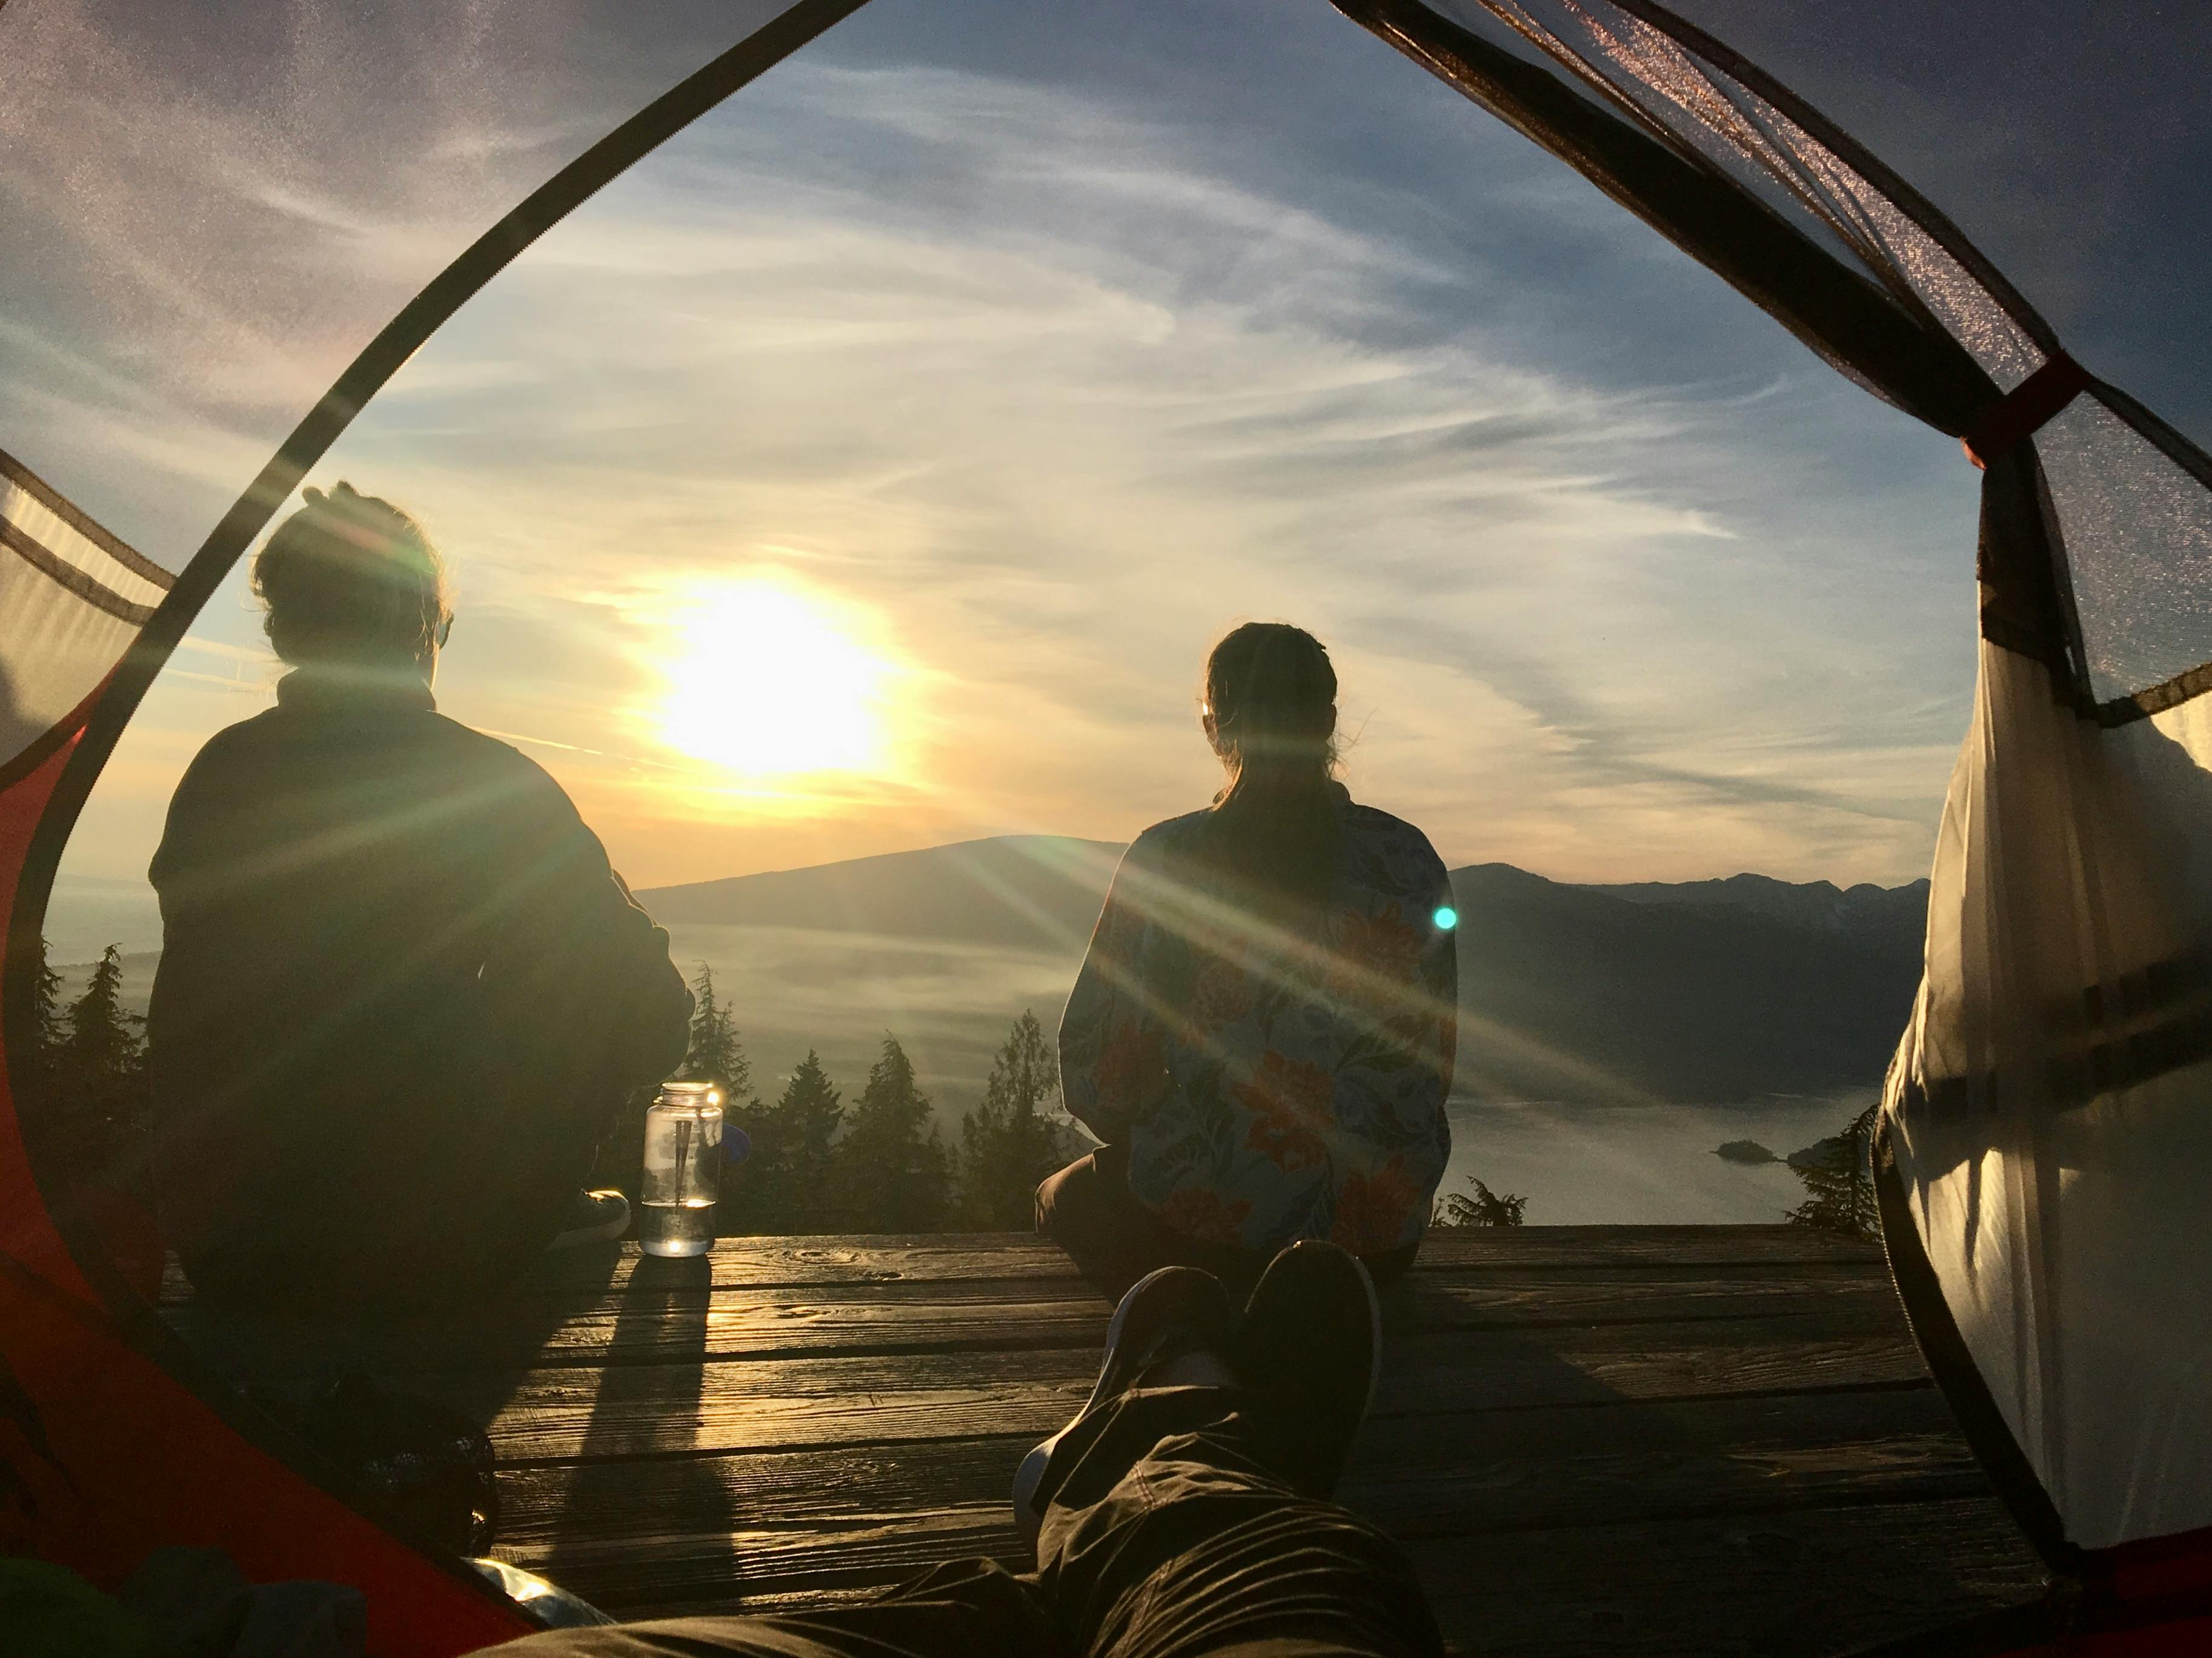 Sitting in front of their tent, two hikers gaze out at a lake, mountains, and setting sun.